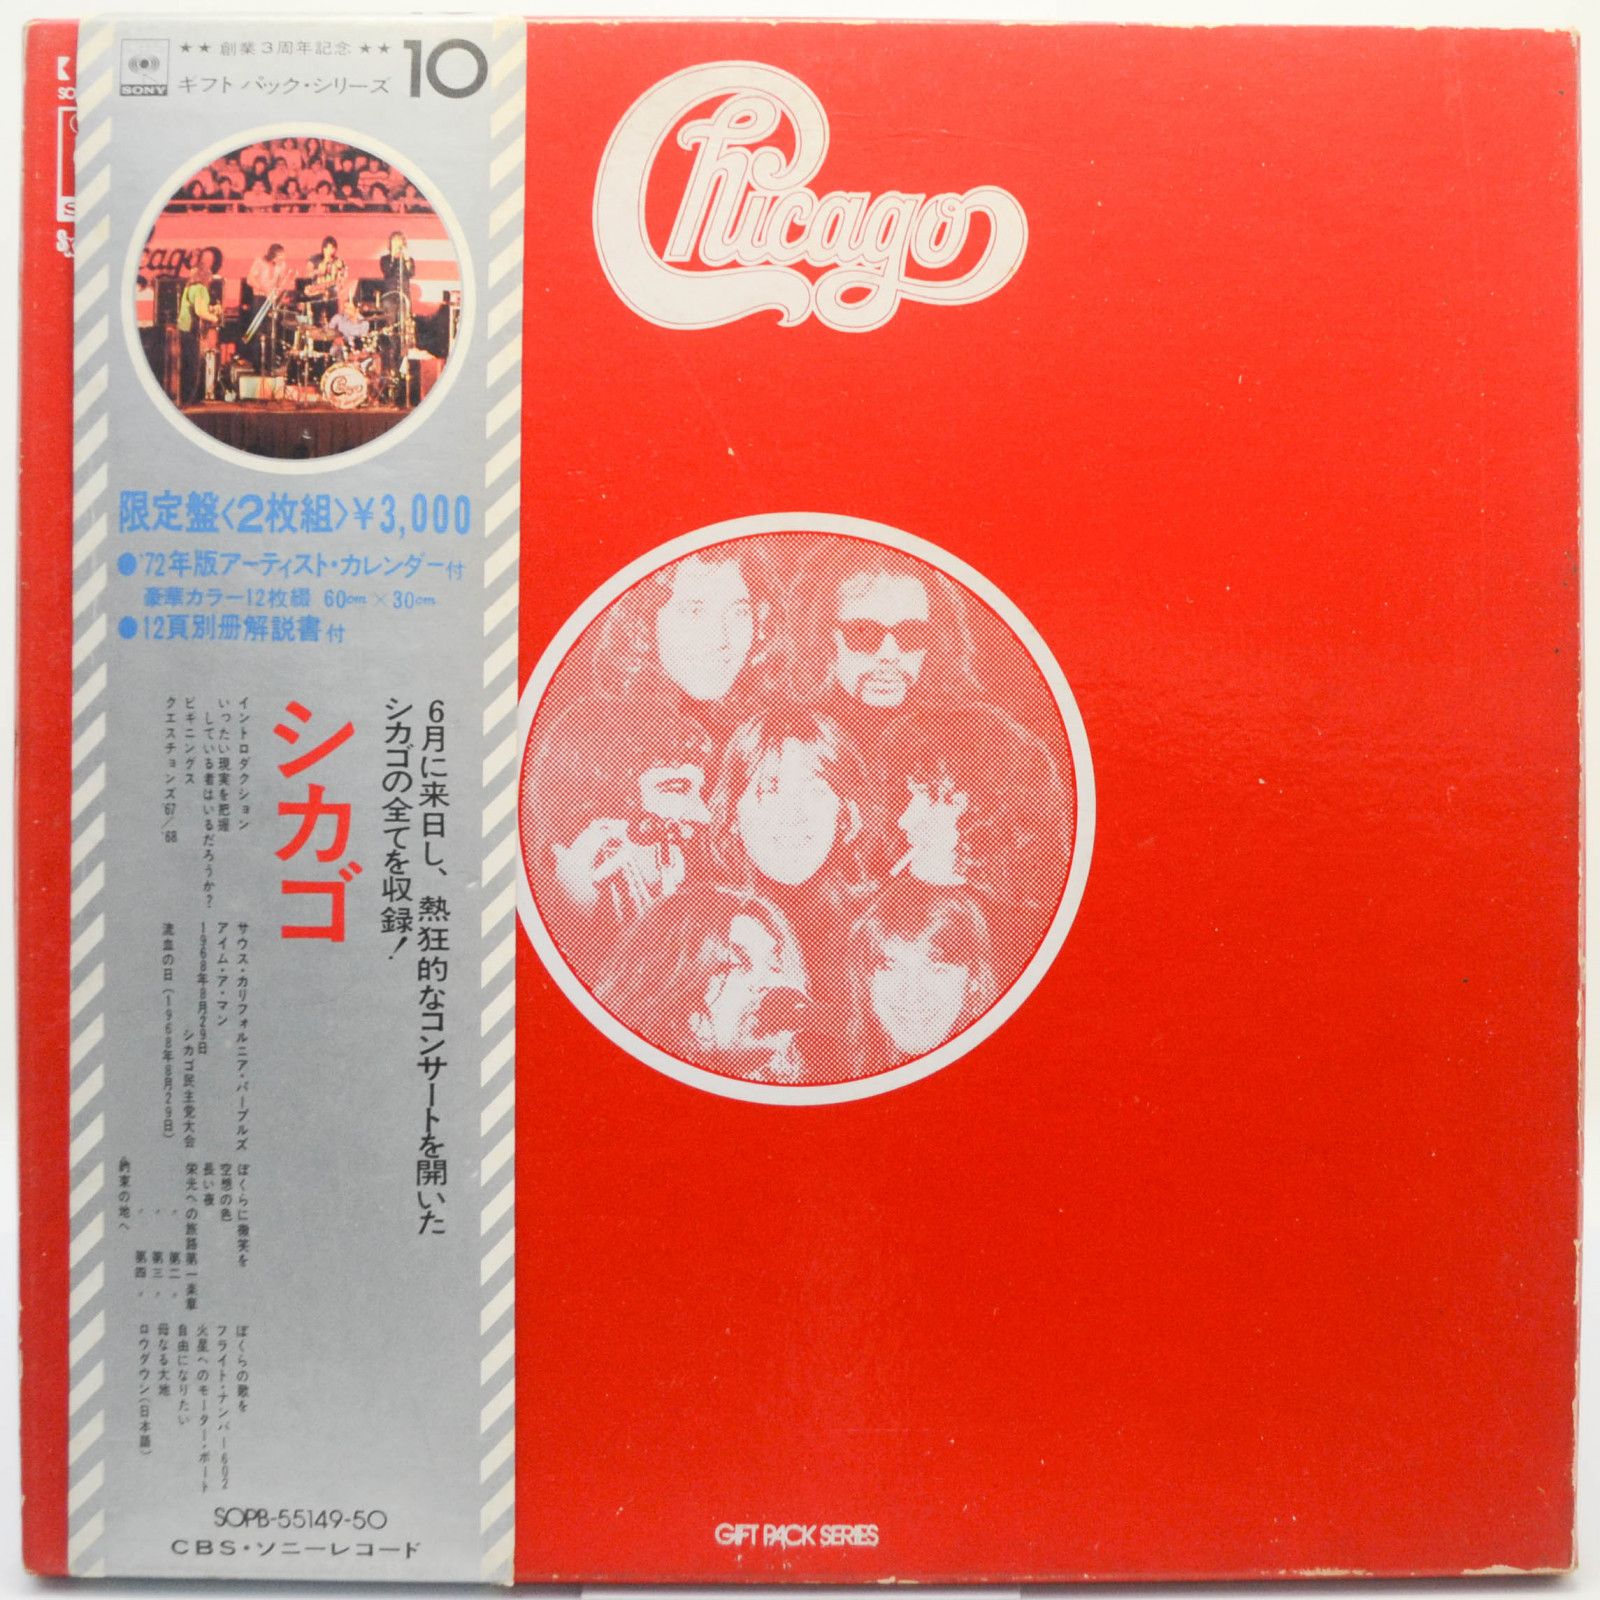 Chicago — Gift Pack Series (2LP, Box-set,booklet),